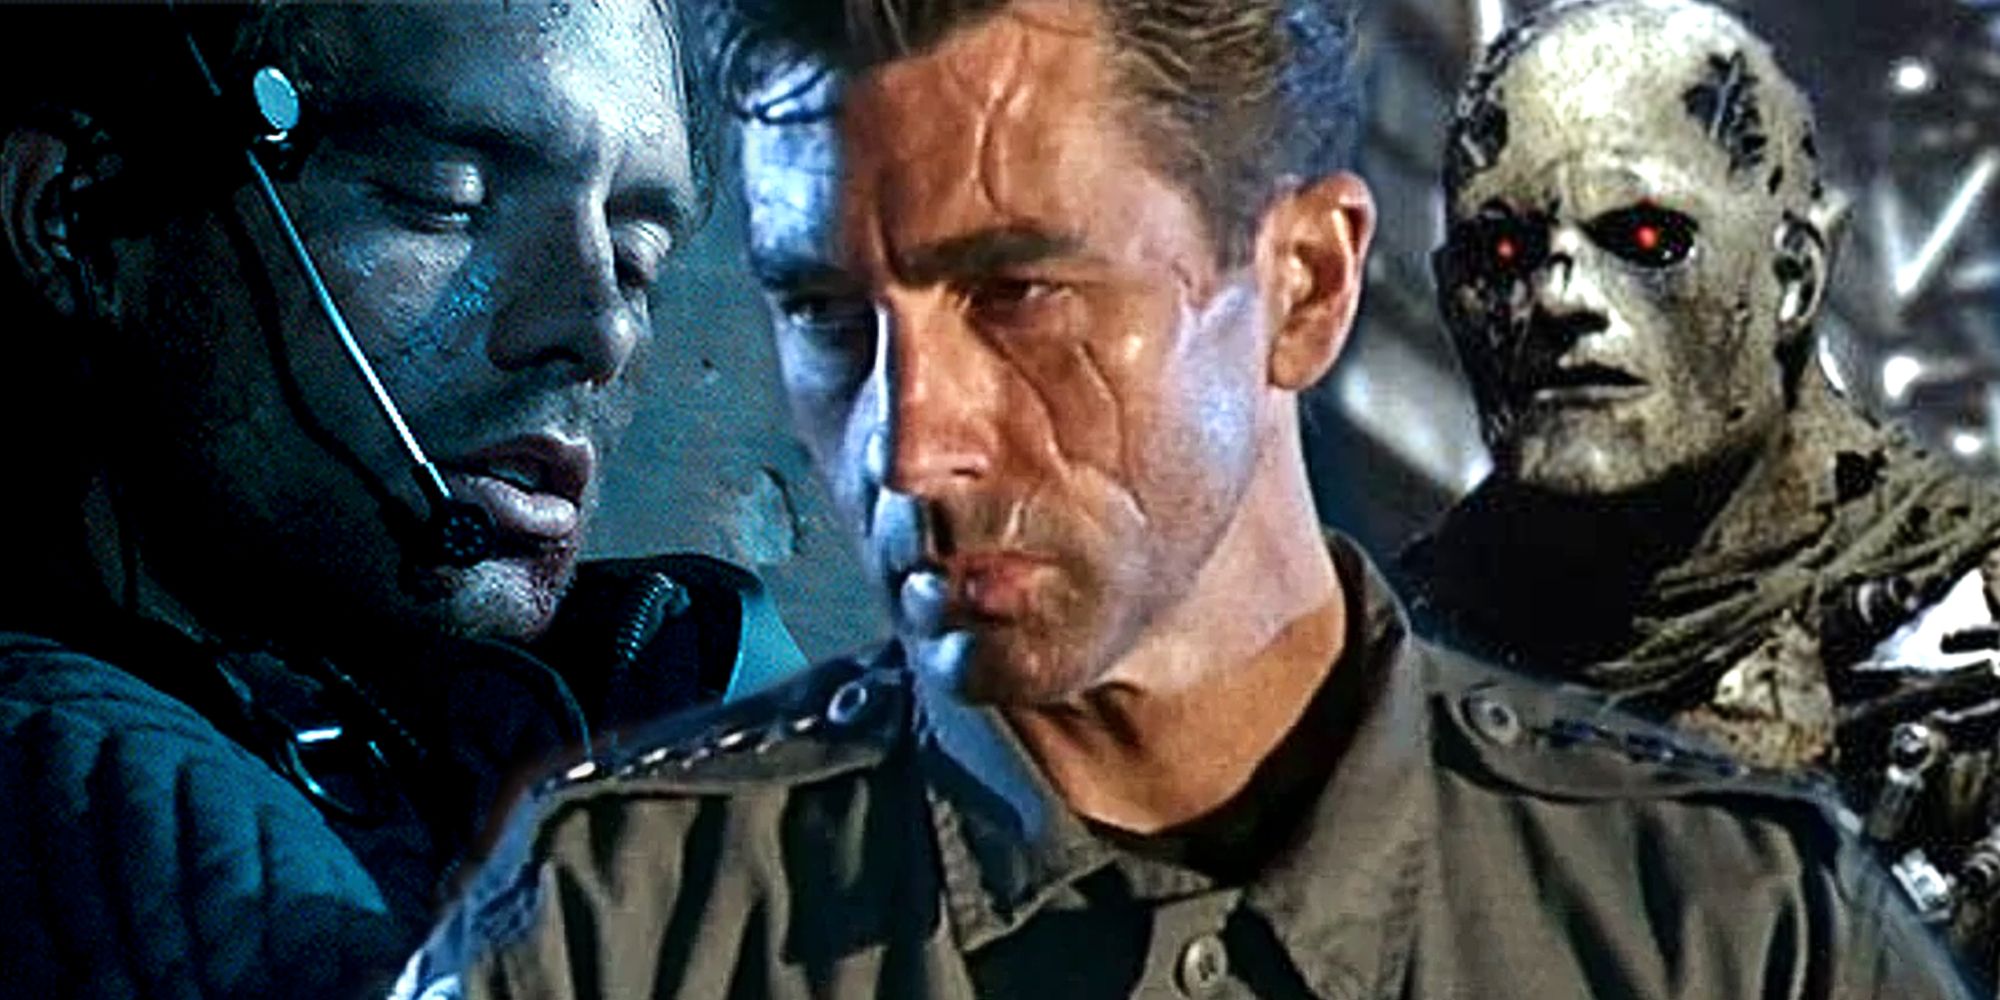 John Connor, Kyle Reese, and a T-660 in the Terminator Movies